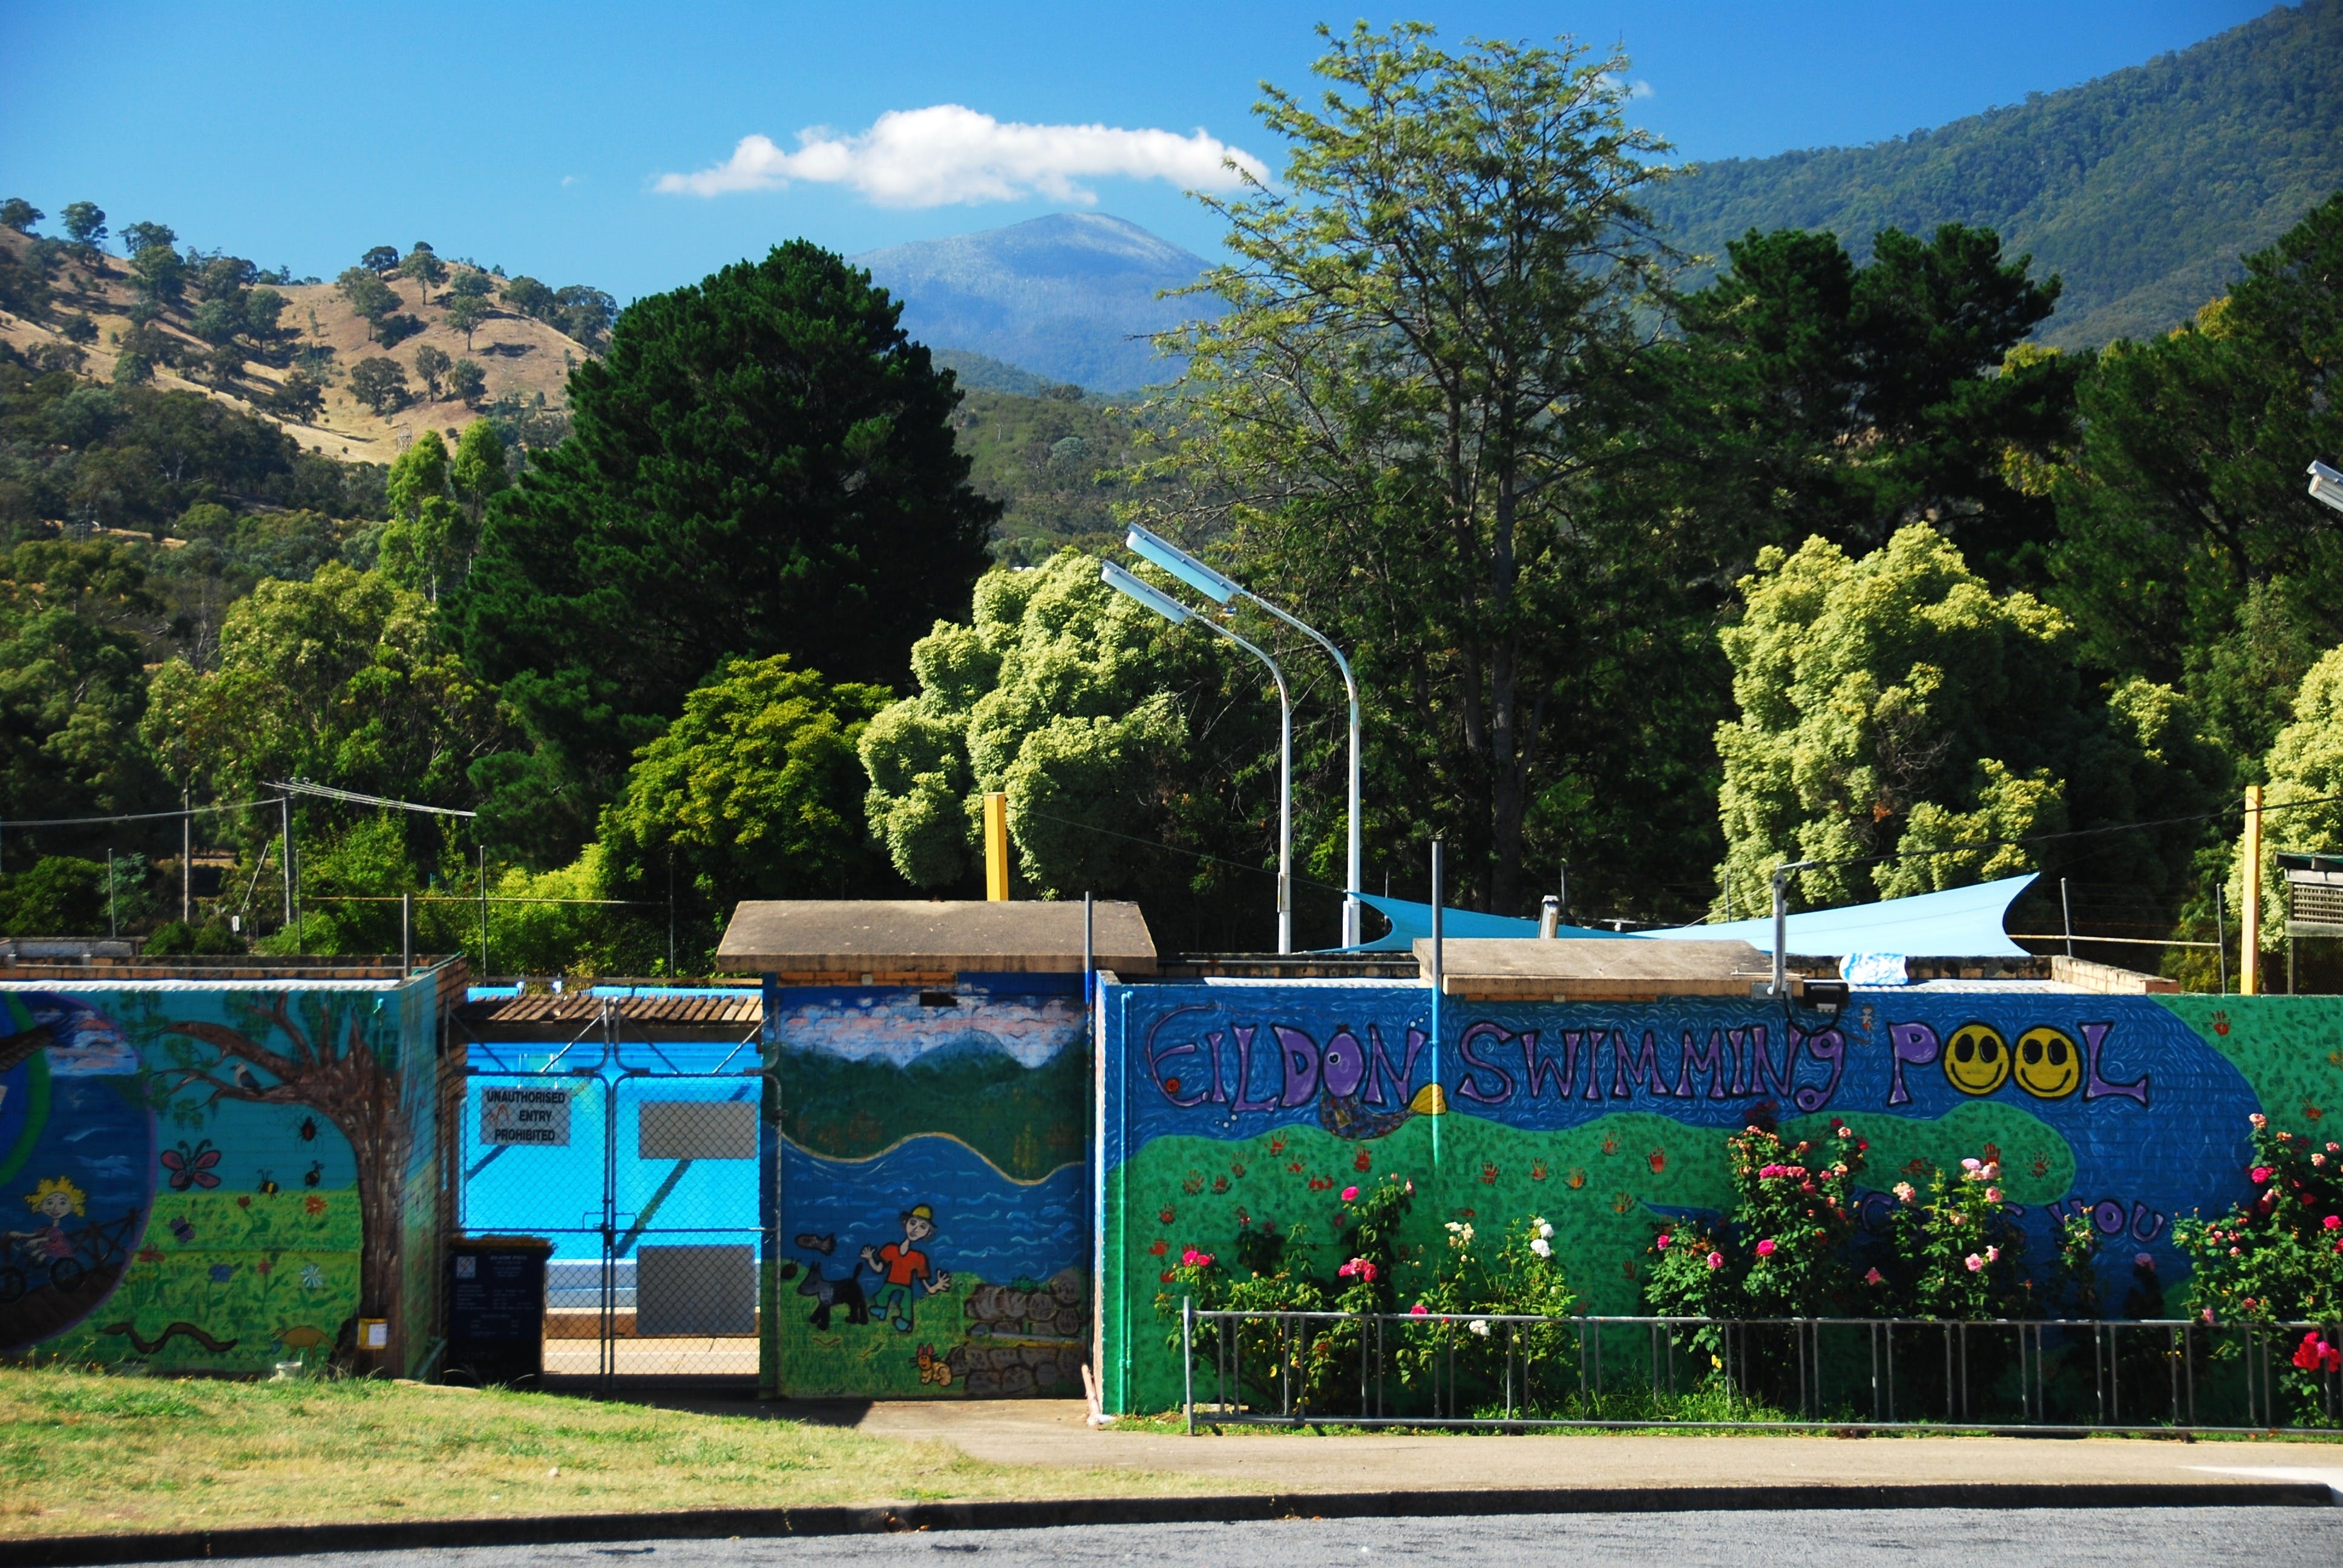 Eildon Outdoor Swimming Pool - Accommodation Nelson Bay